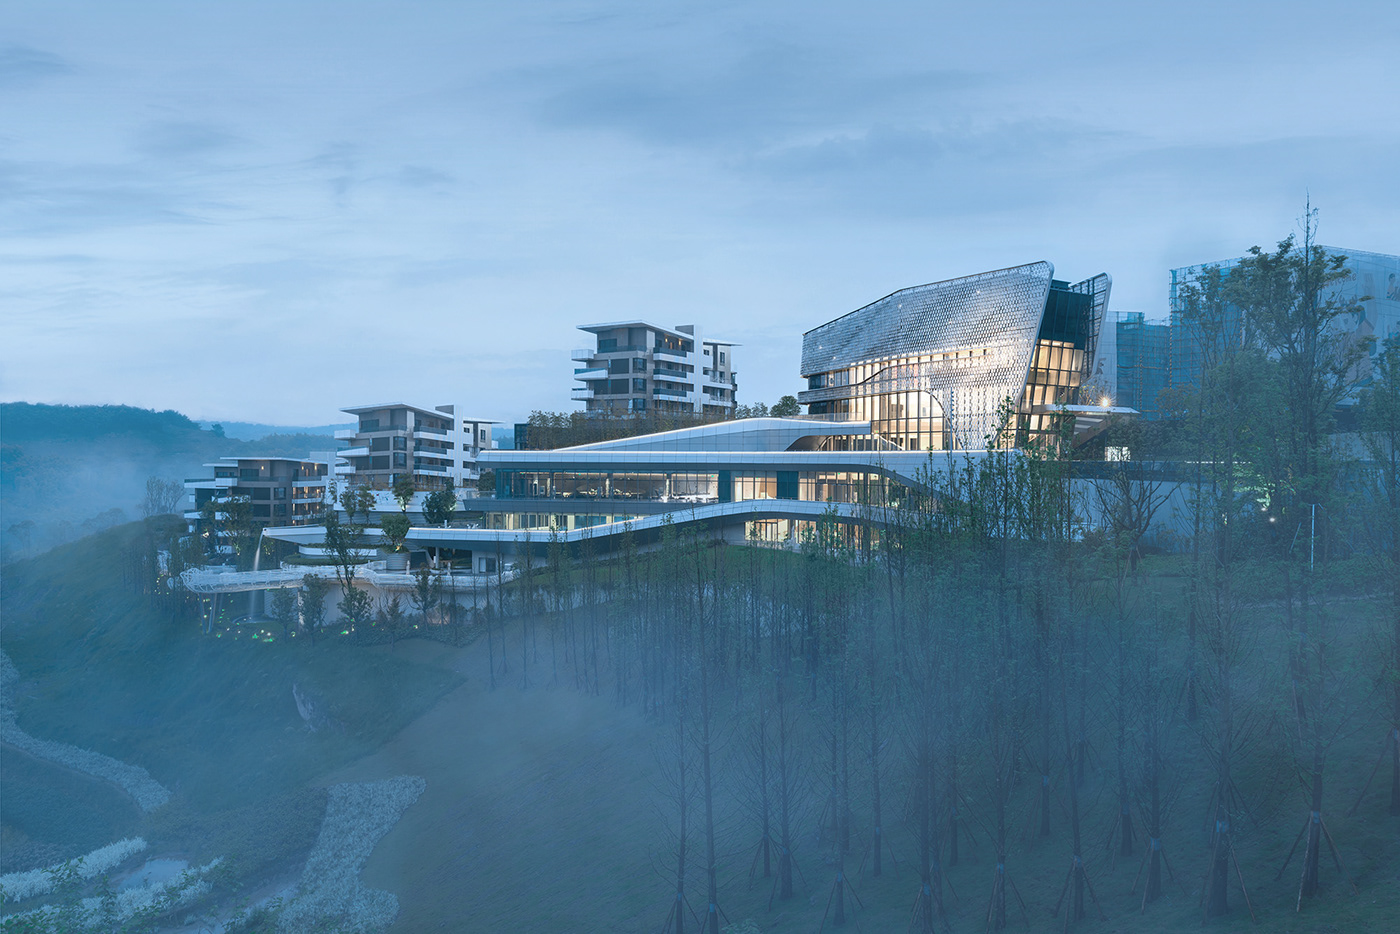 10design architecture built china chongqing Clubhouse